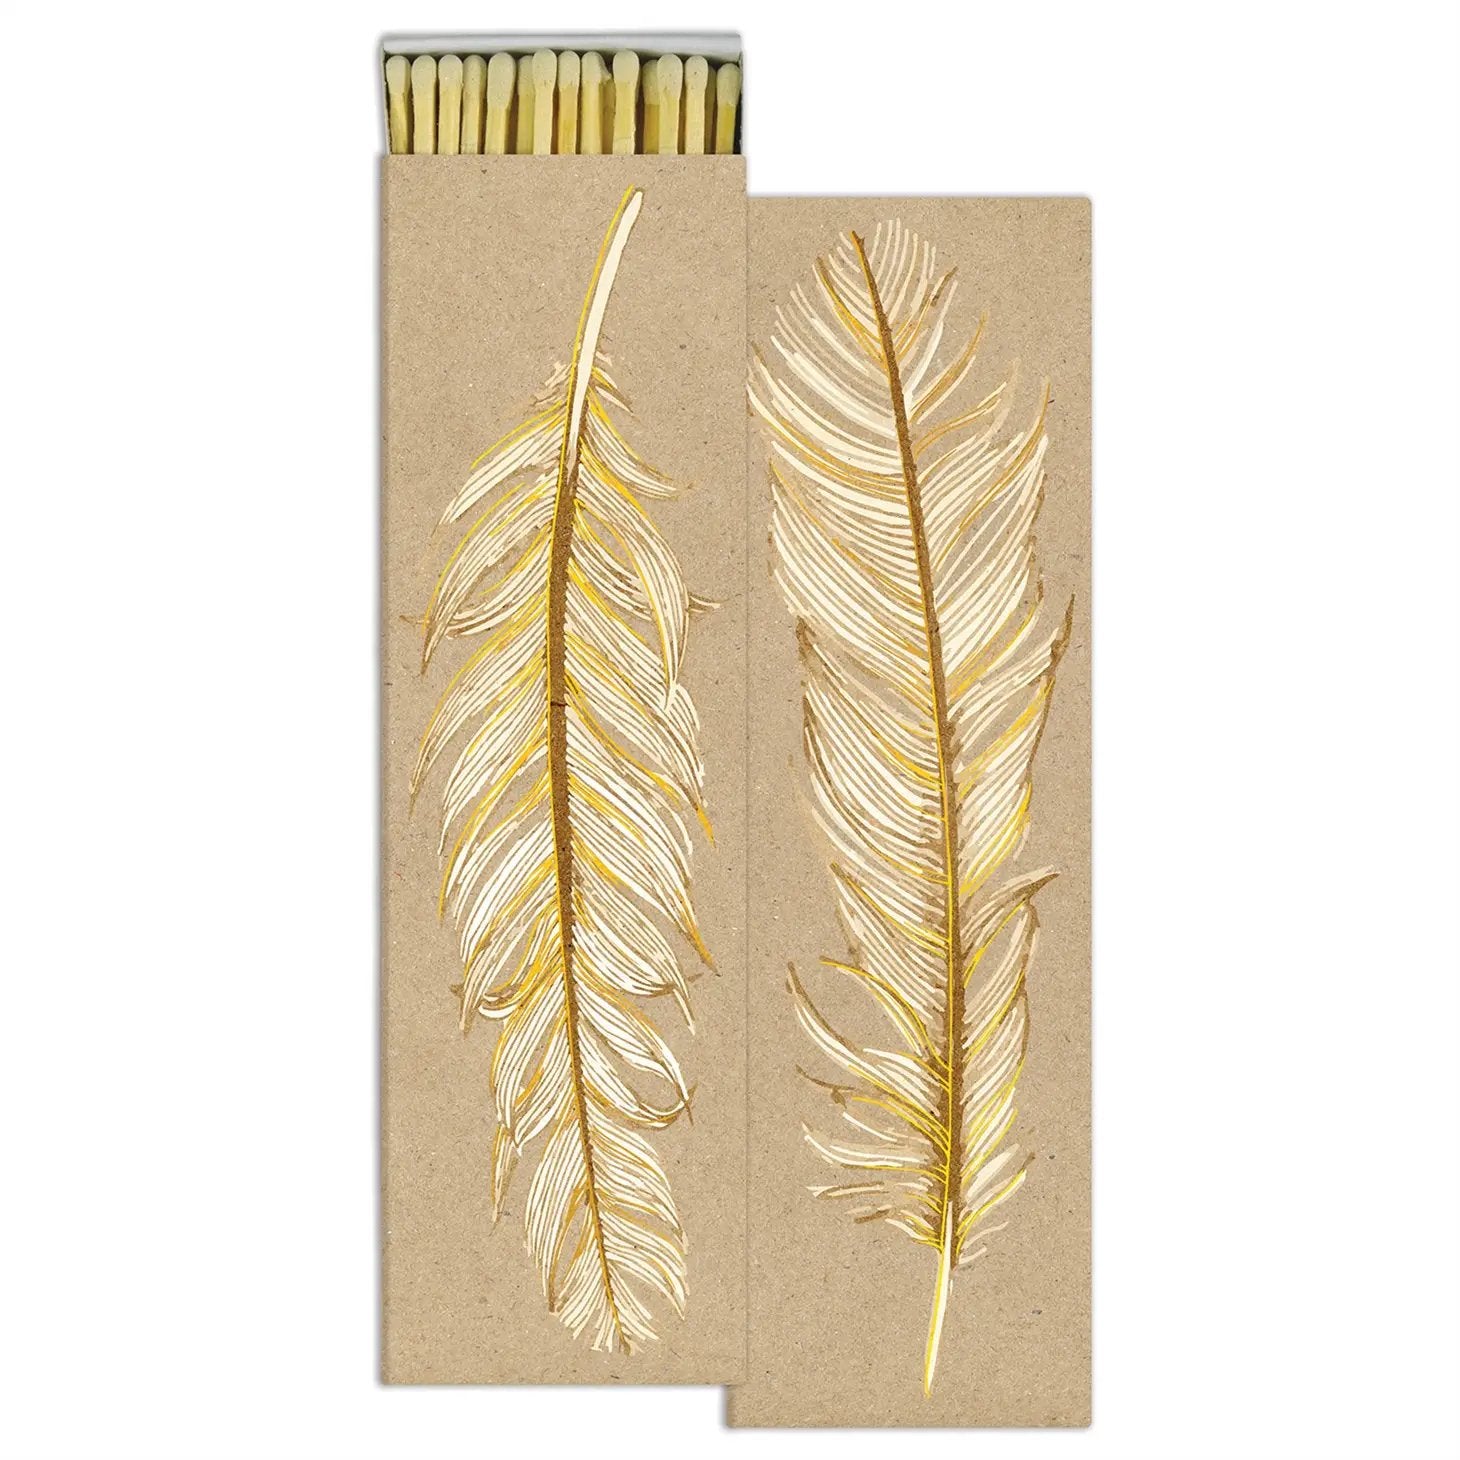 Ruffled Feather Long Matches - Matches